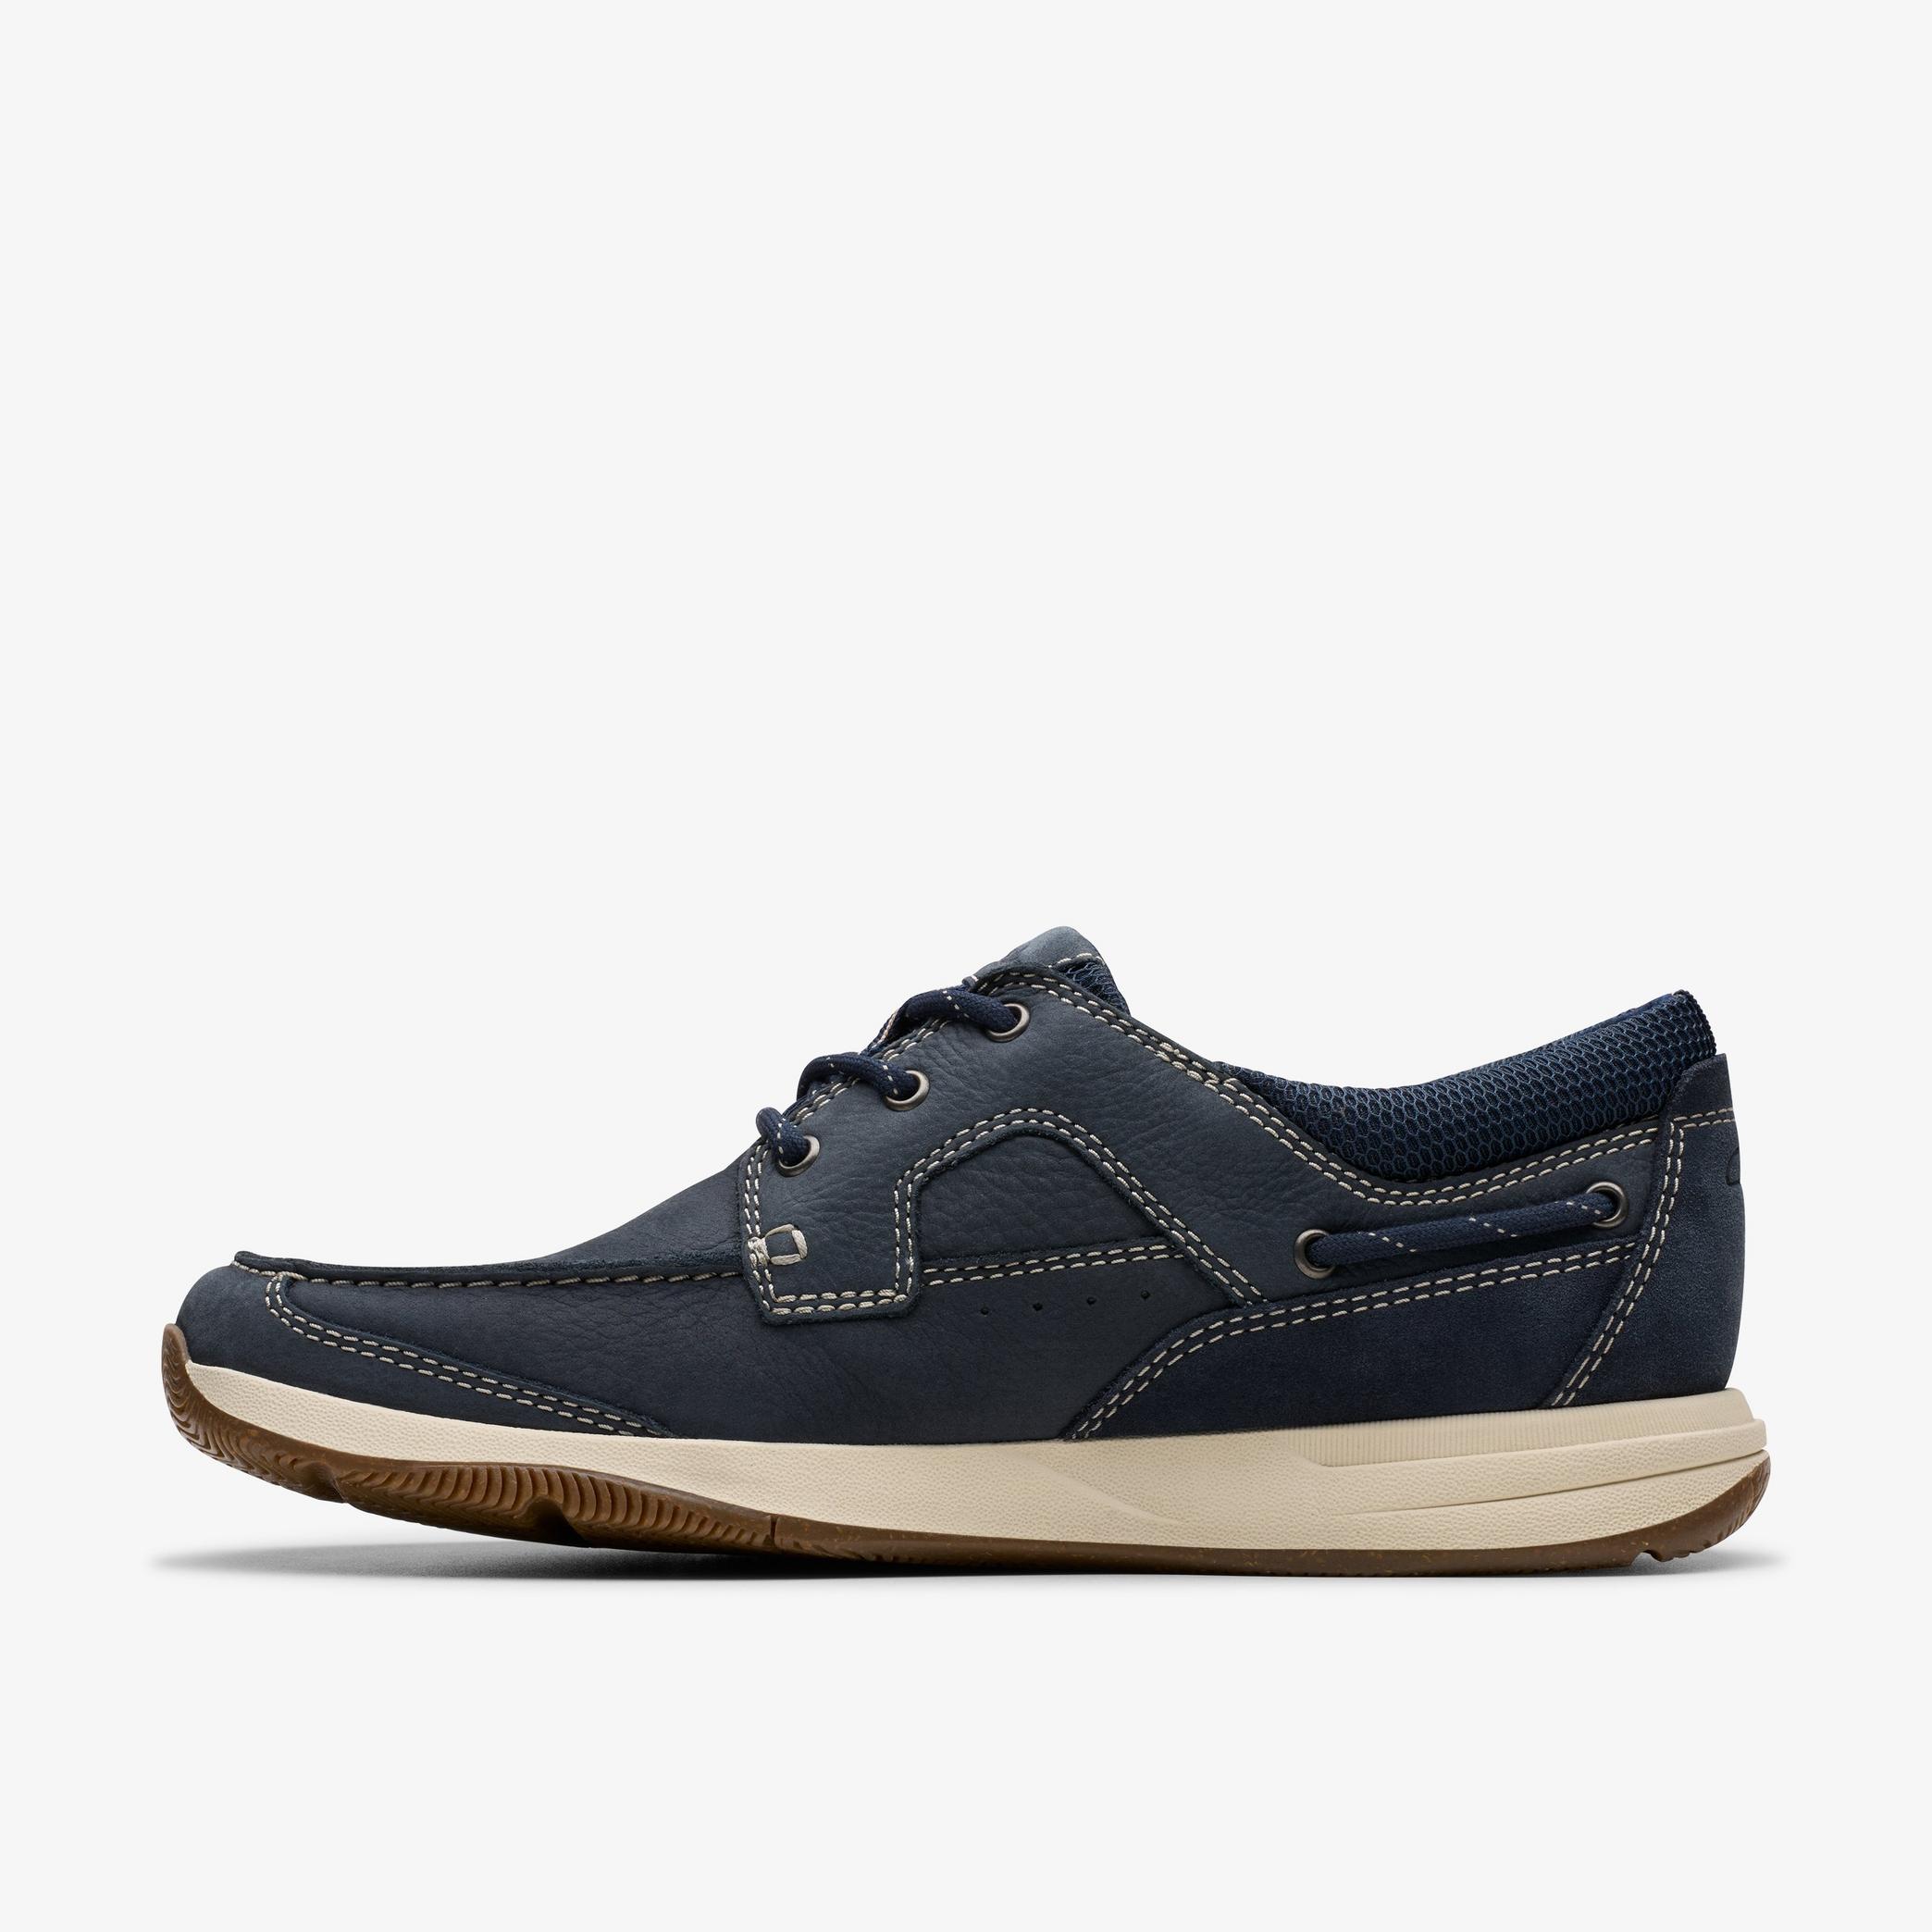 Sailview Lace Navy Nubuck Boat Shoes, view 2 of 8